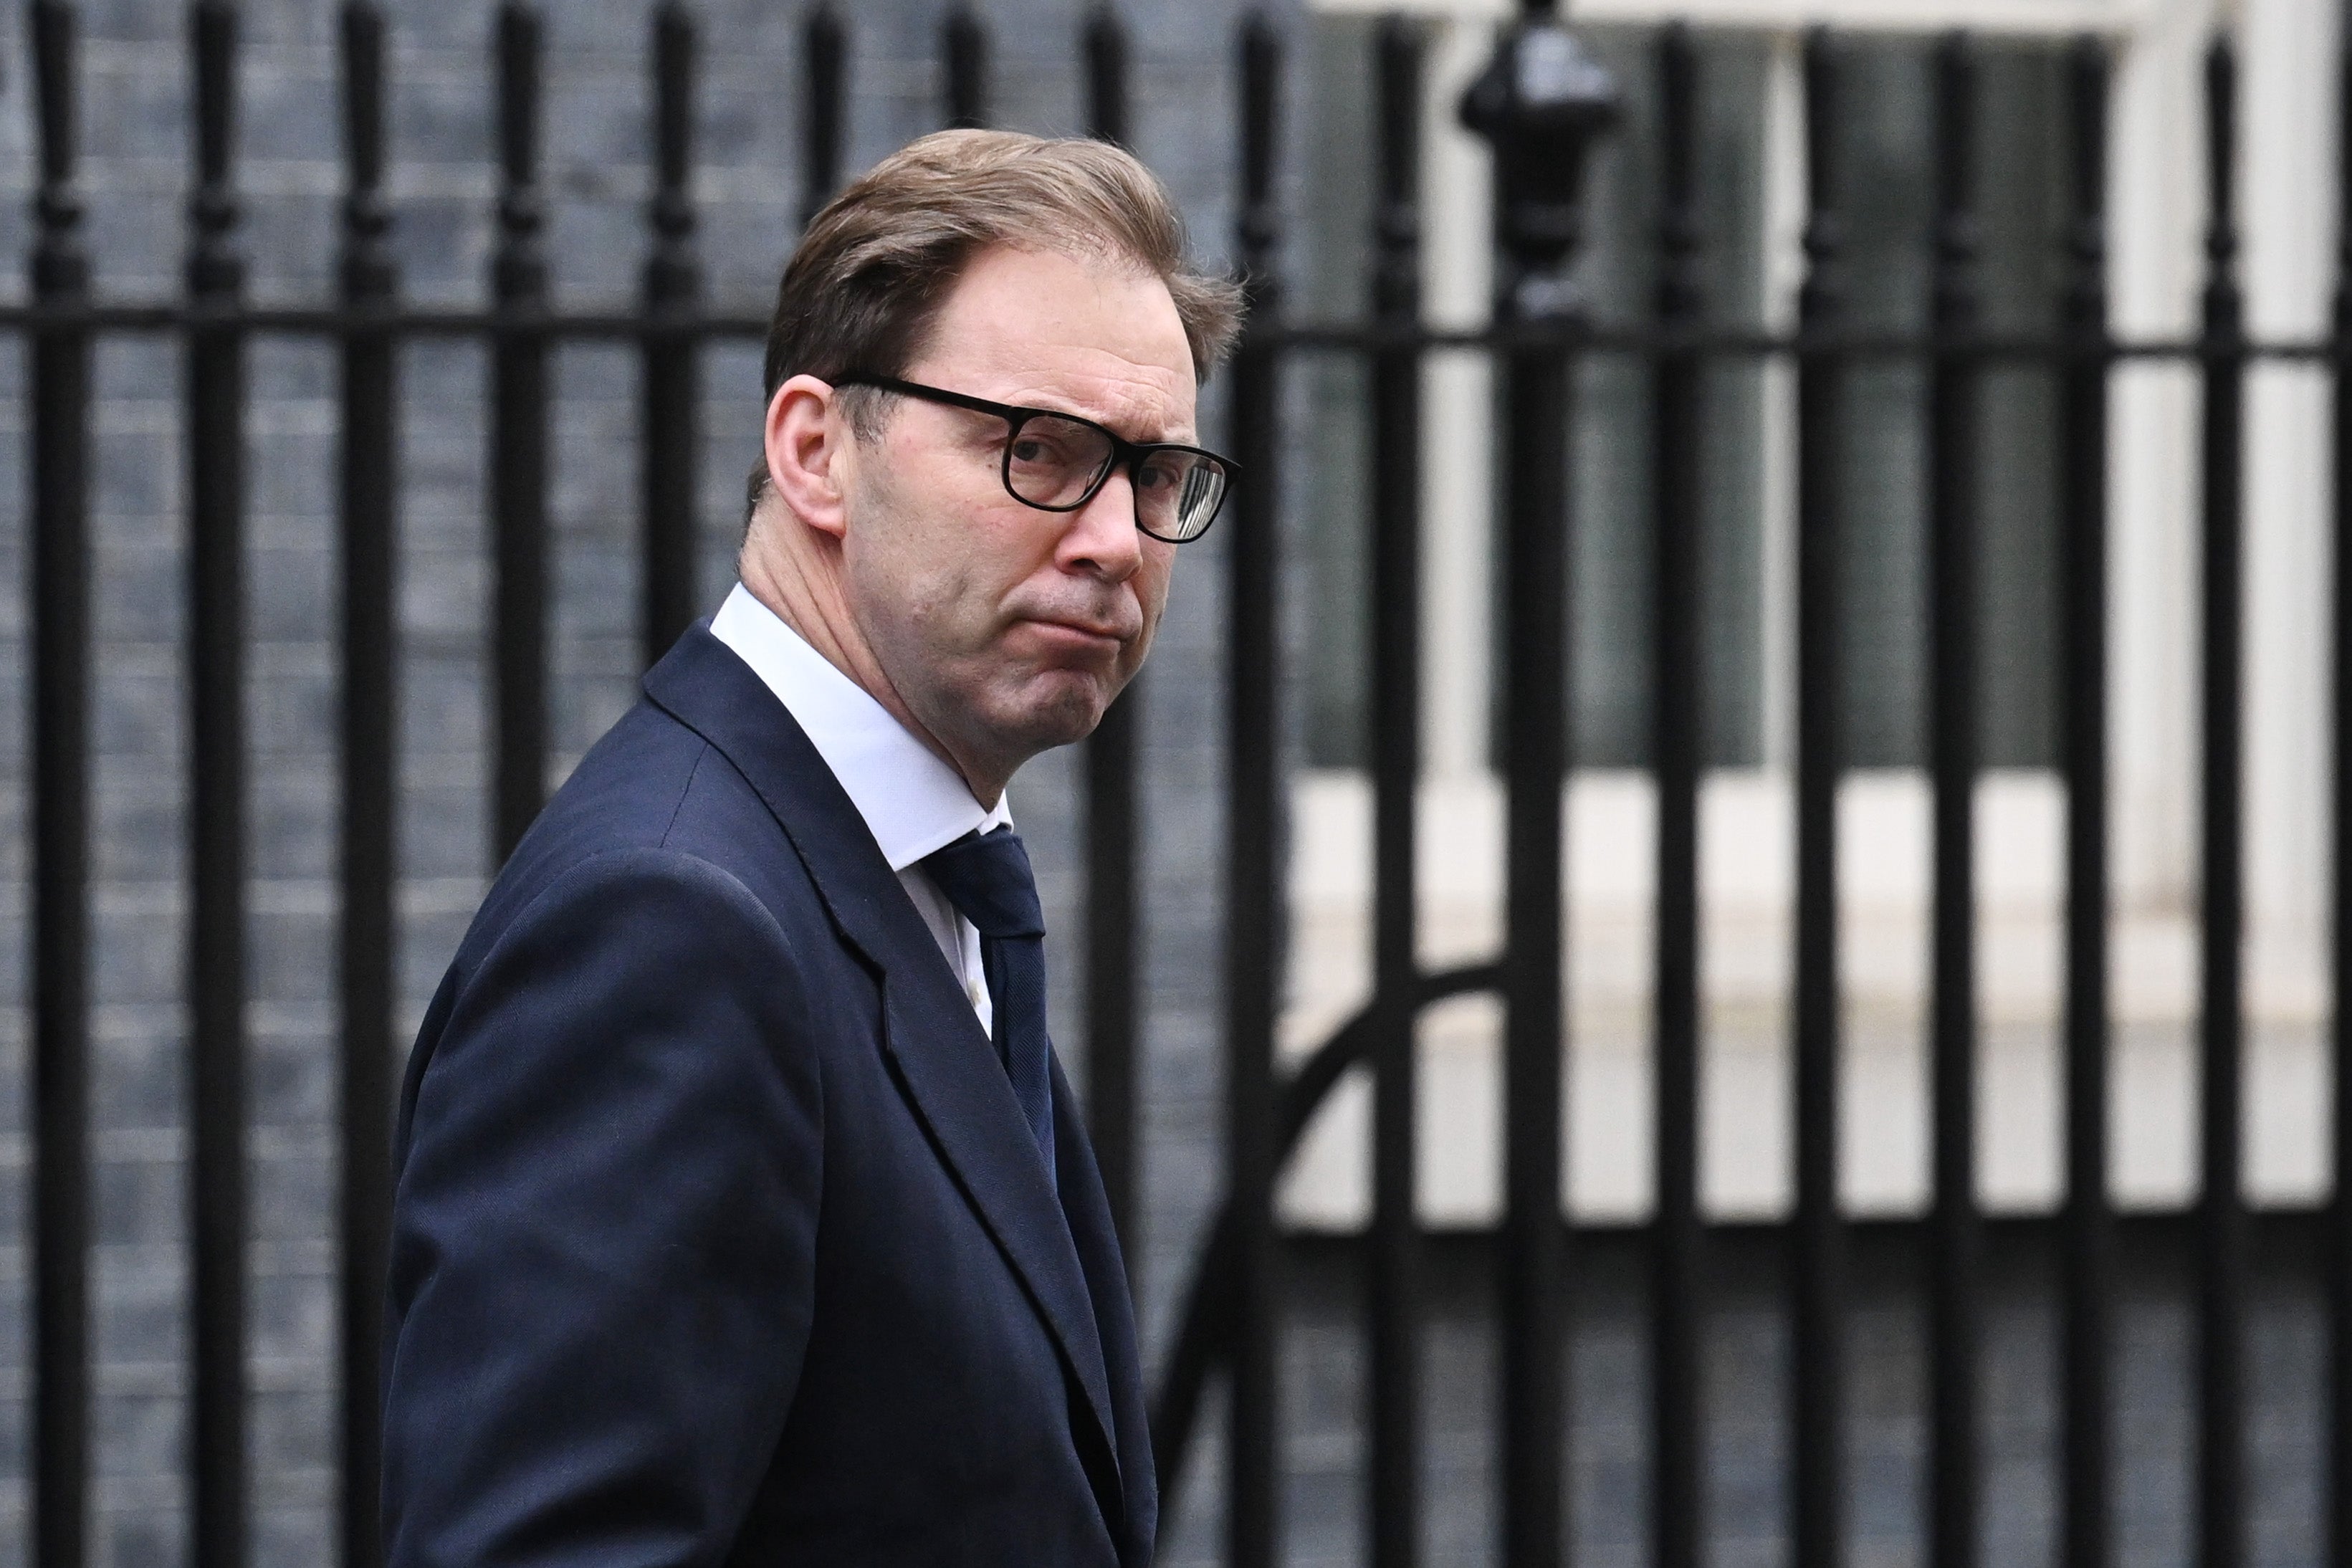 Tory MP Tobias Ellwood called for Mr Johnson to not be allowed to stand as an MP until he has shown “commitment” to the party